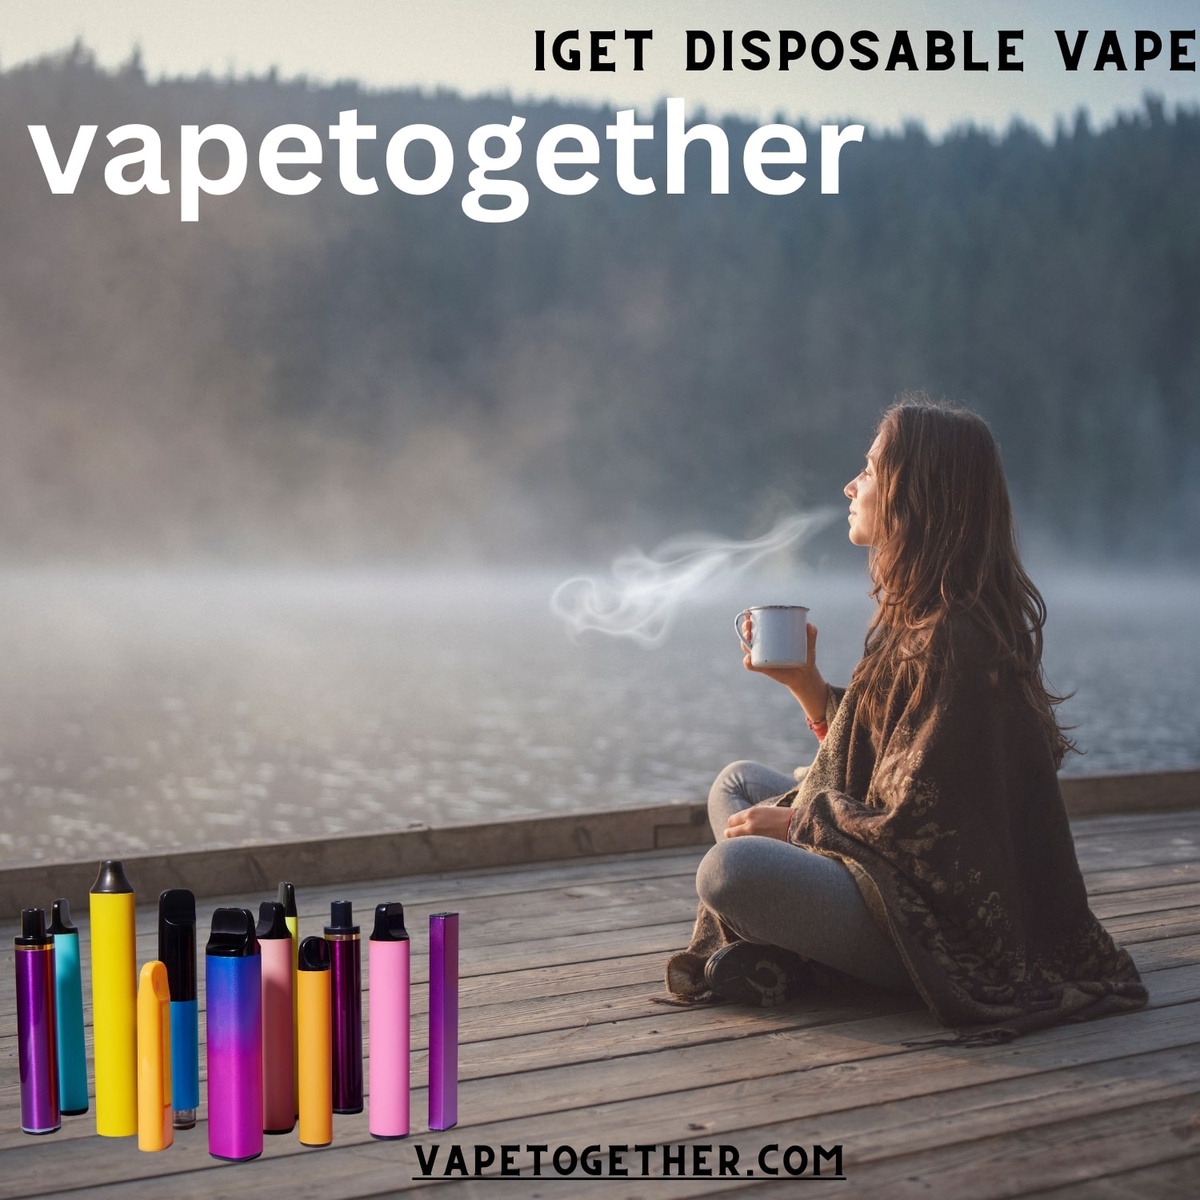 Unleash Flavorful Freedom with IGET Disposable Vape - Your Ultimate Portable Vaping Companion